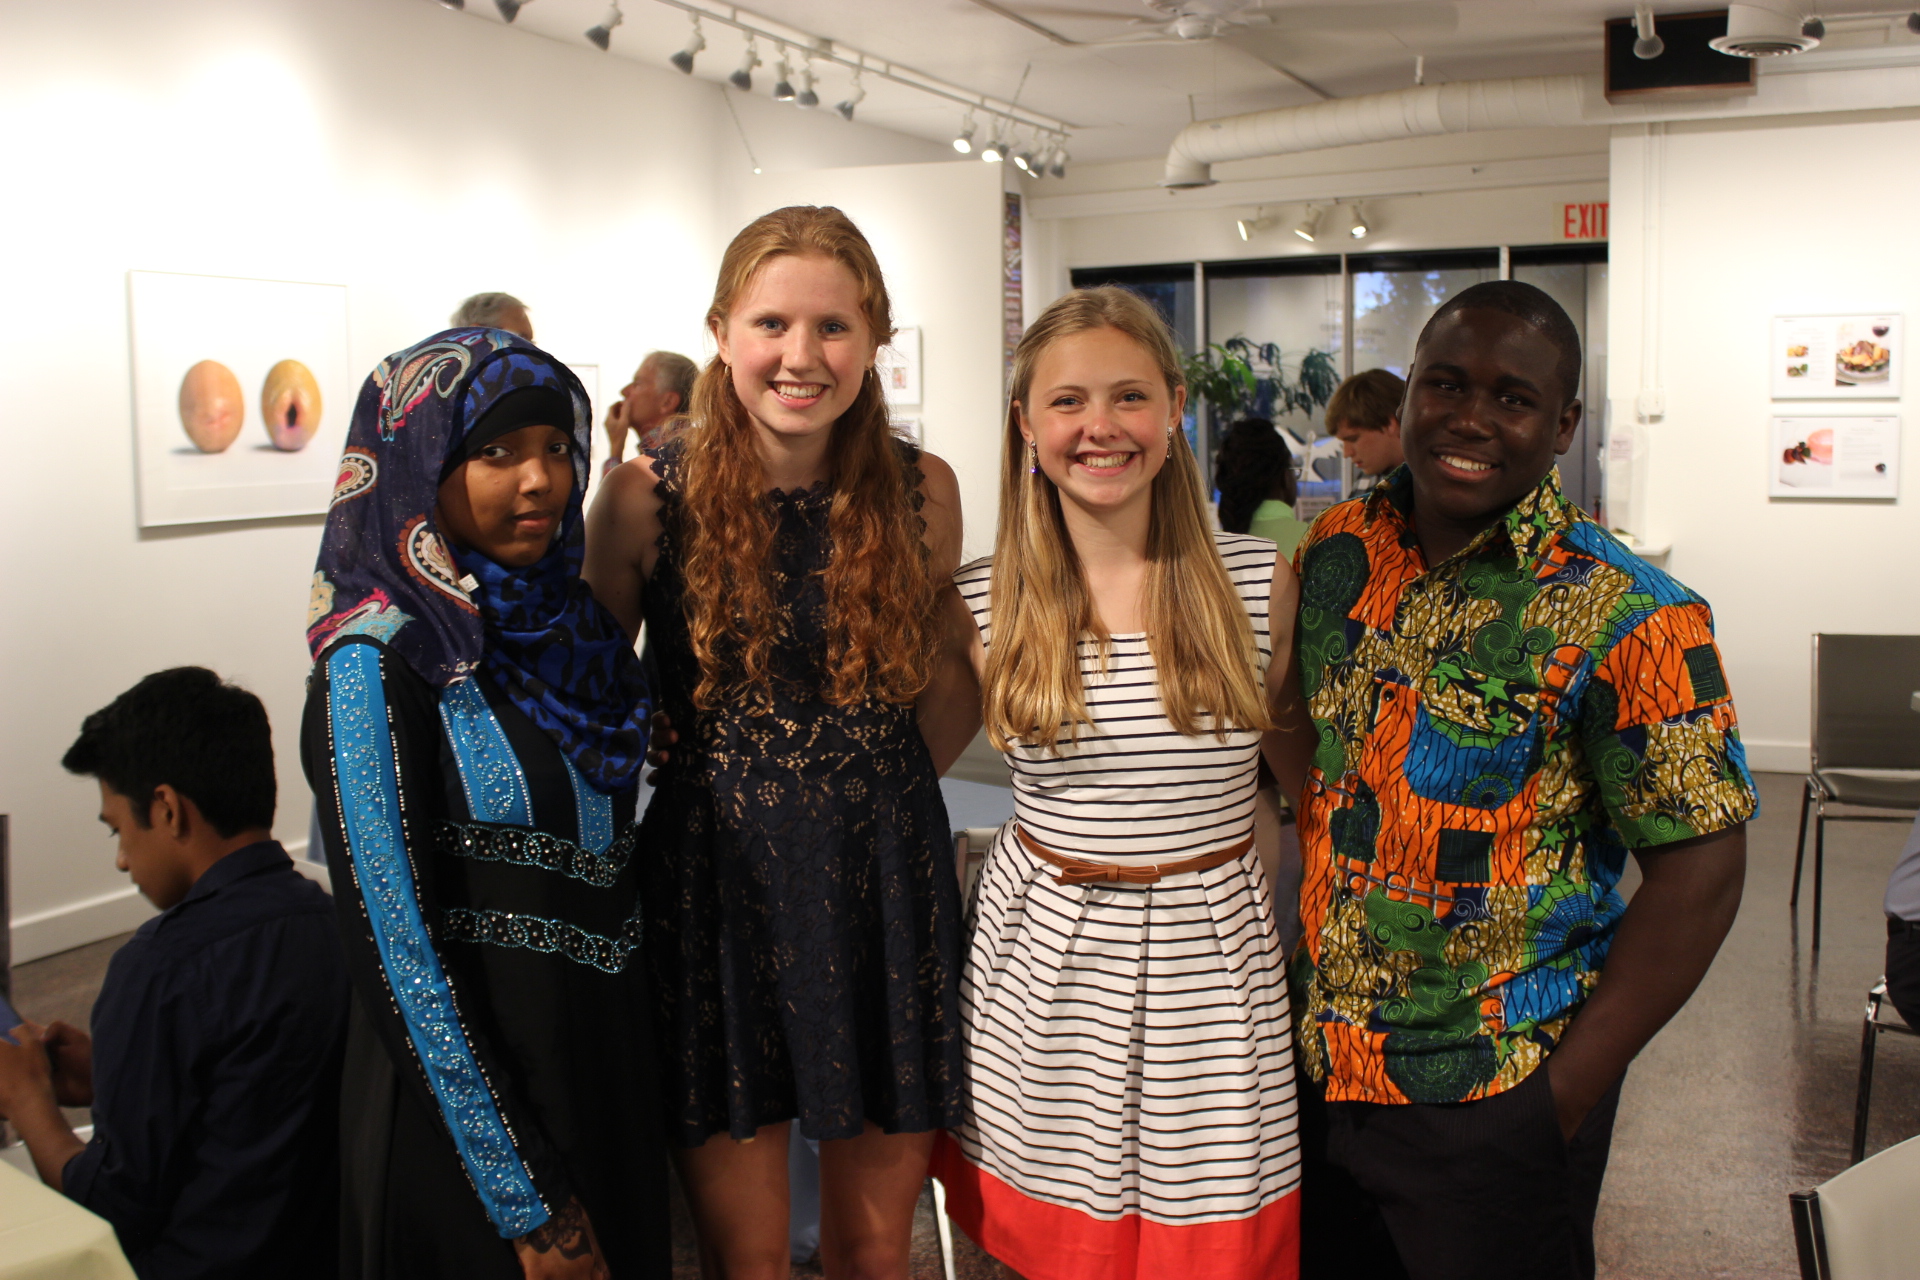 Students at a previous Youth Peace Award posing for a photo at ArtRage.